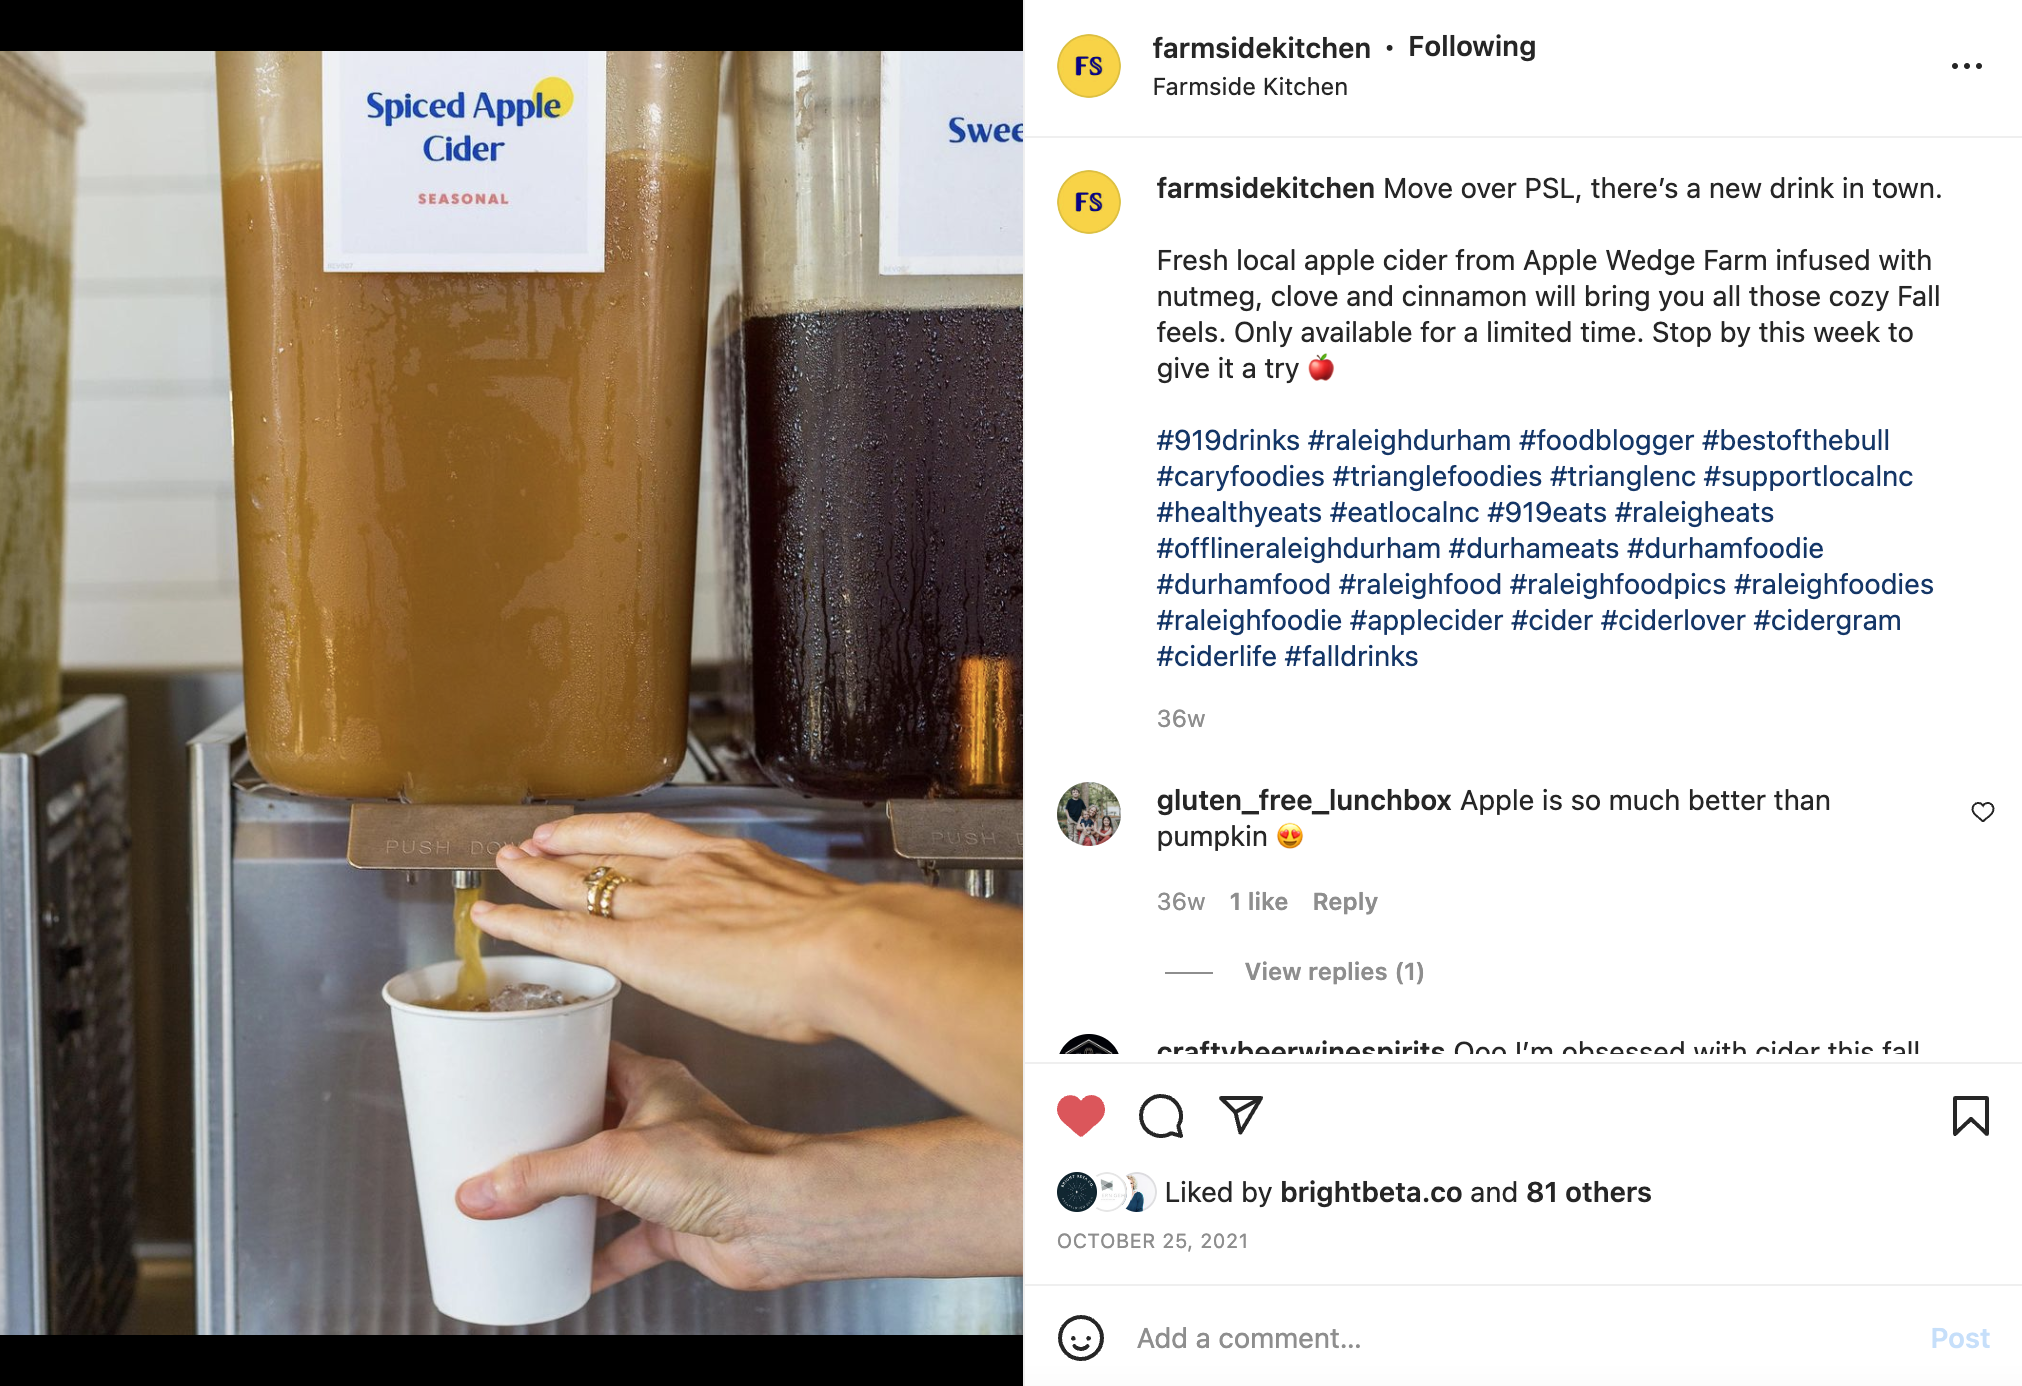 Social media content for a fast casual restaurant based in Durham, NC